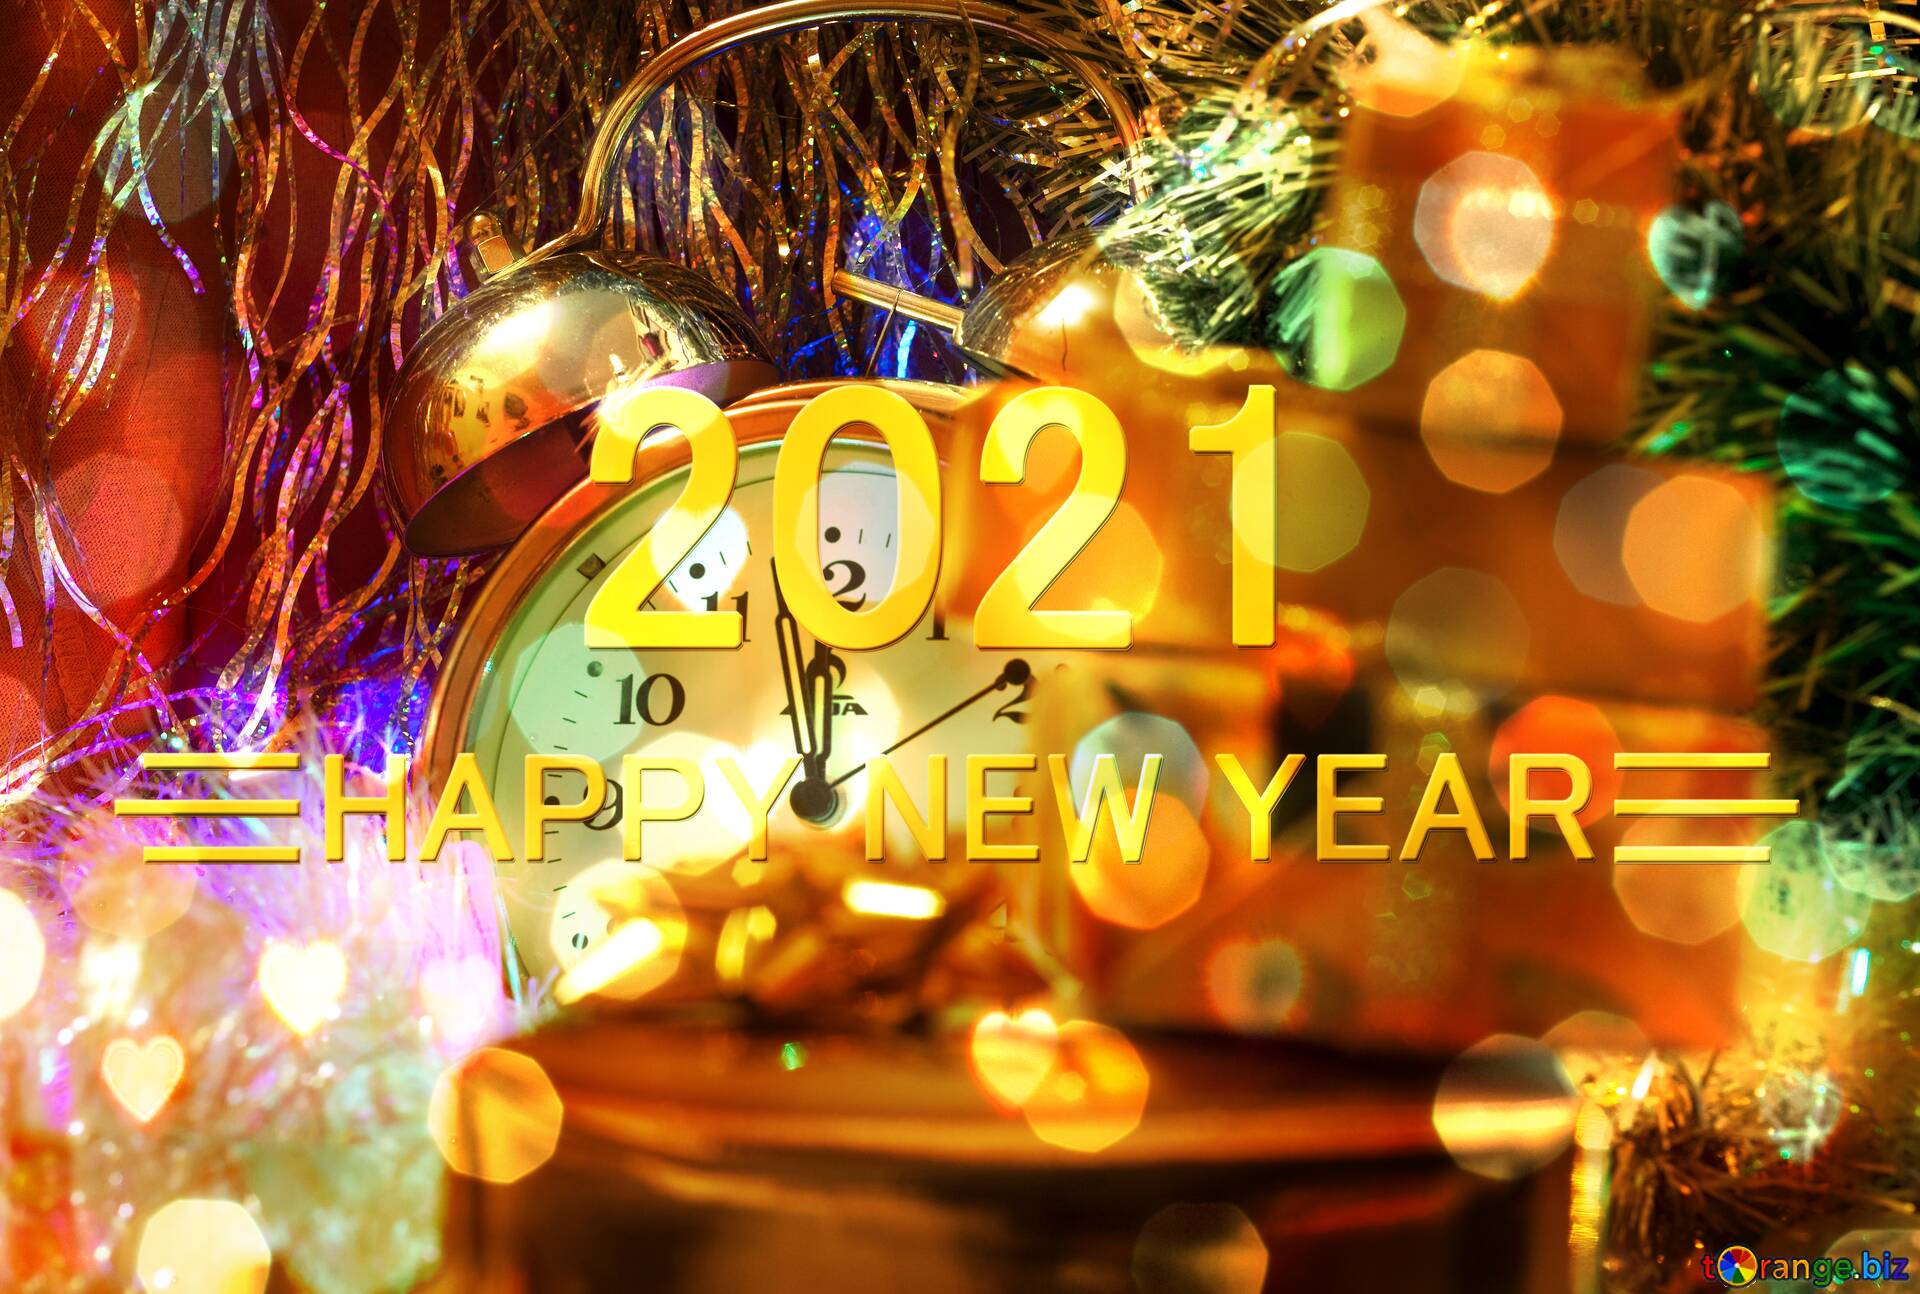 Download Free Picture Winter Holiday Celebrations Minutes Party Card Background Happy New Year 2021 On CC BY License Free Image Stock TOrange.biz Fx №212469